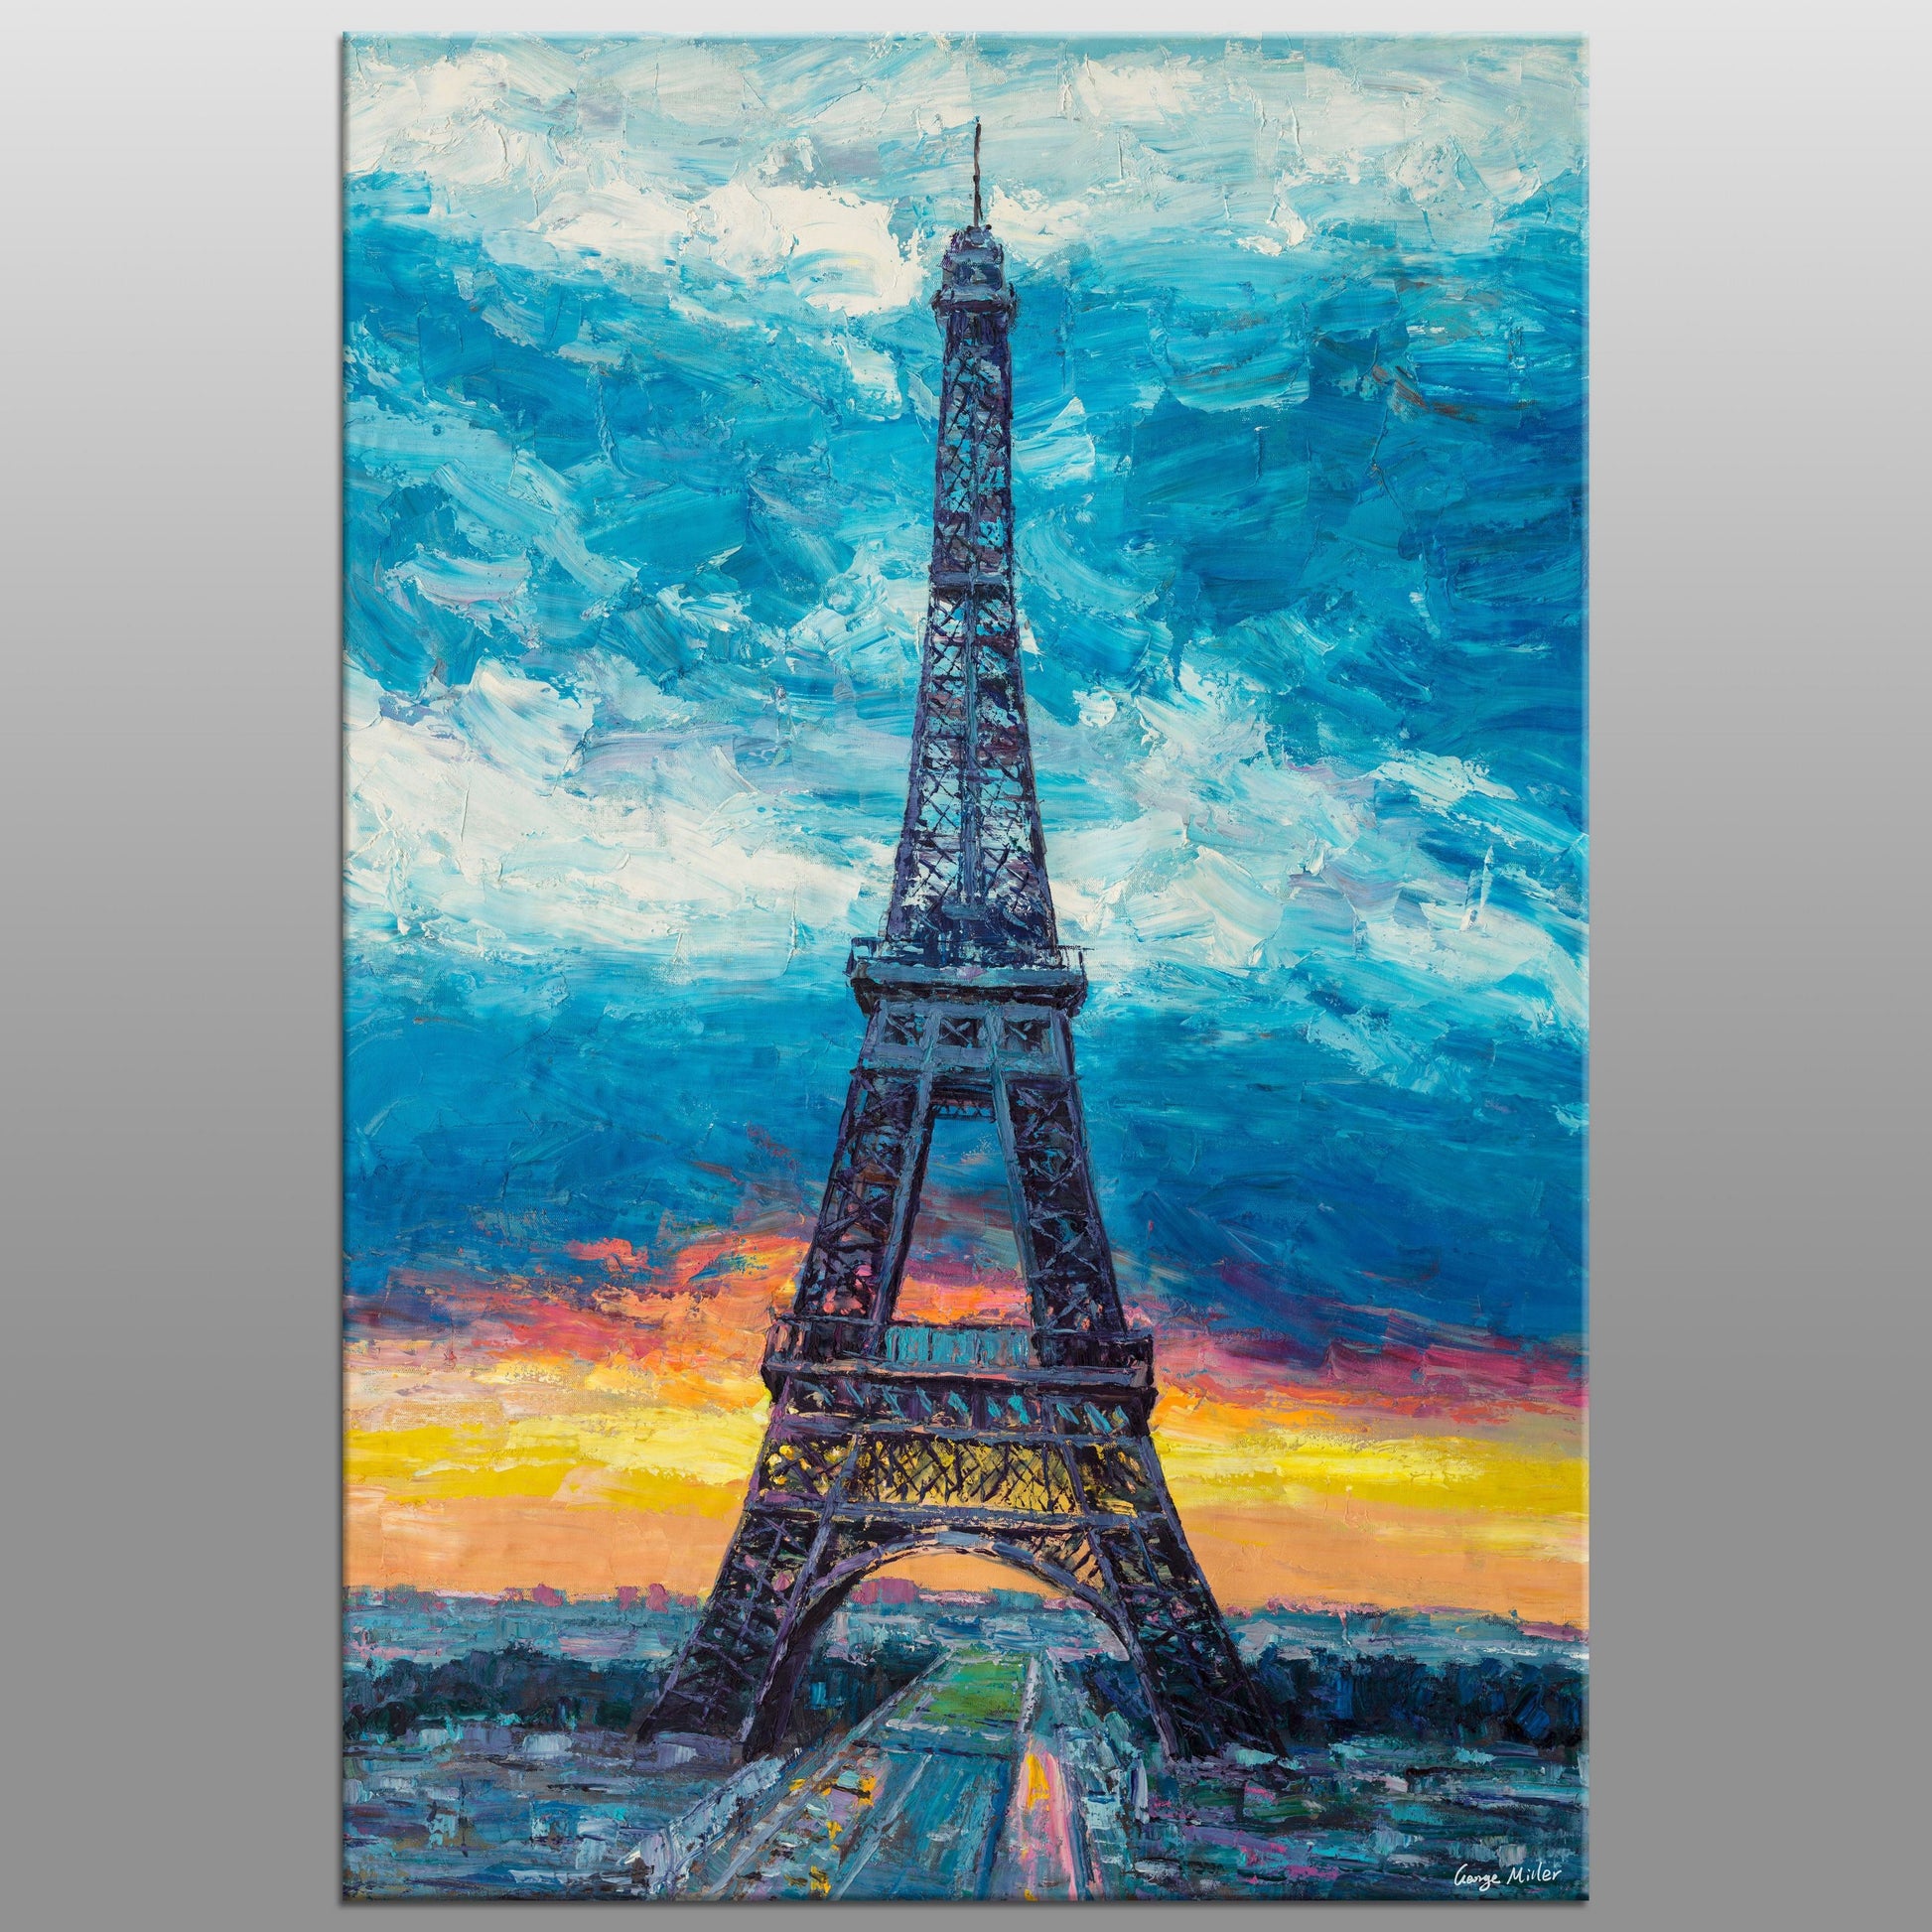 Original Landscape Painting Paris Eiffel Tower at Dawn, Large Wall Art Cityscape, Modern Art, Abstract Canvas Painting, Large Oil Painting